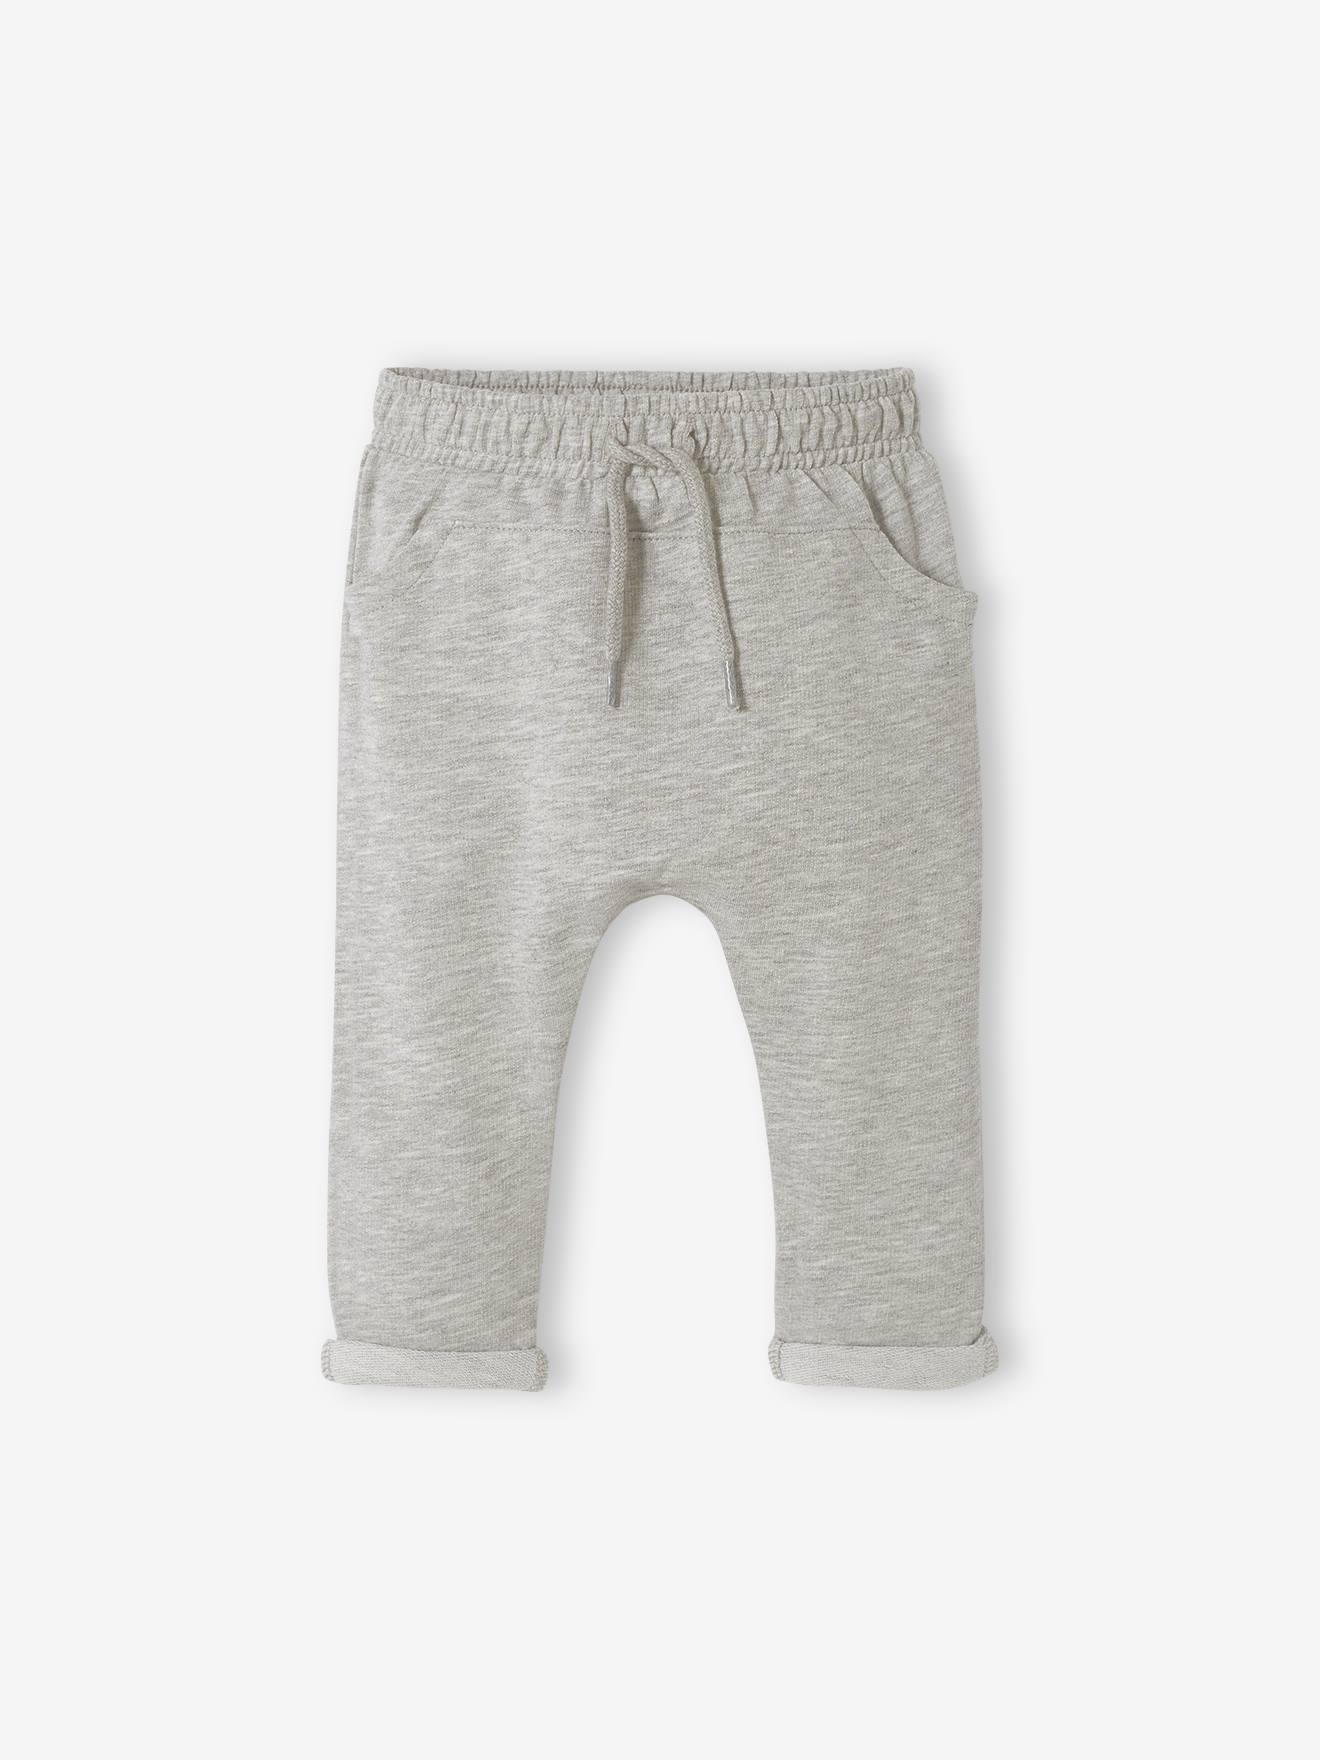 gender neutral pants for baby girl or baby boy medium grey alpaca wool pants for infants unisex pants for toddlers Clothing Unisex Kids Clothing Trousers Scandinavian design 